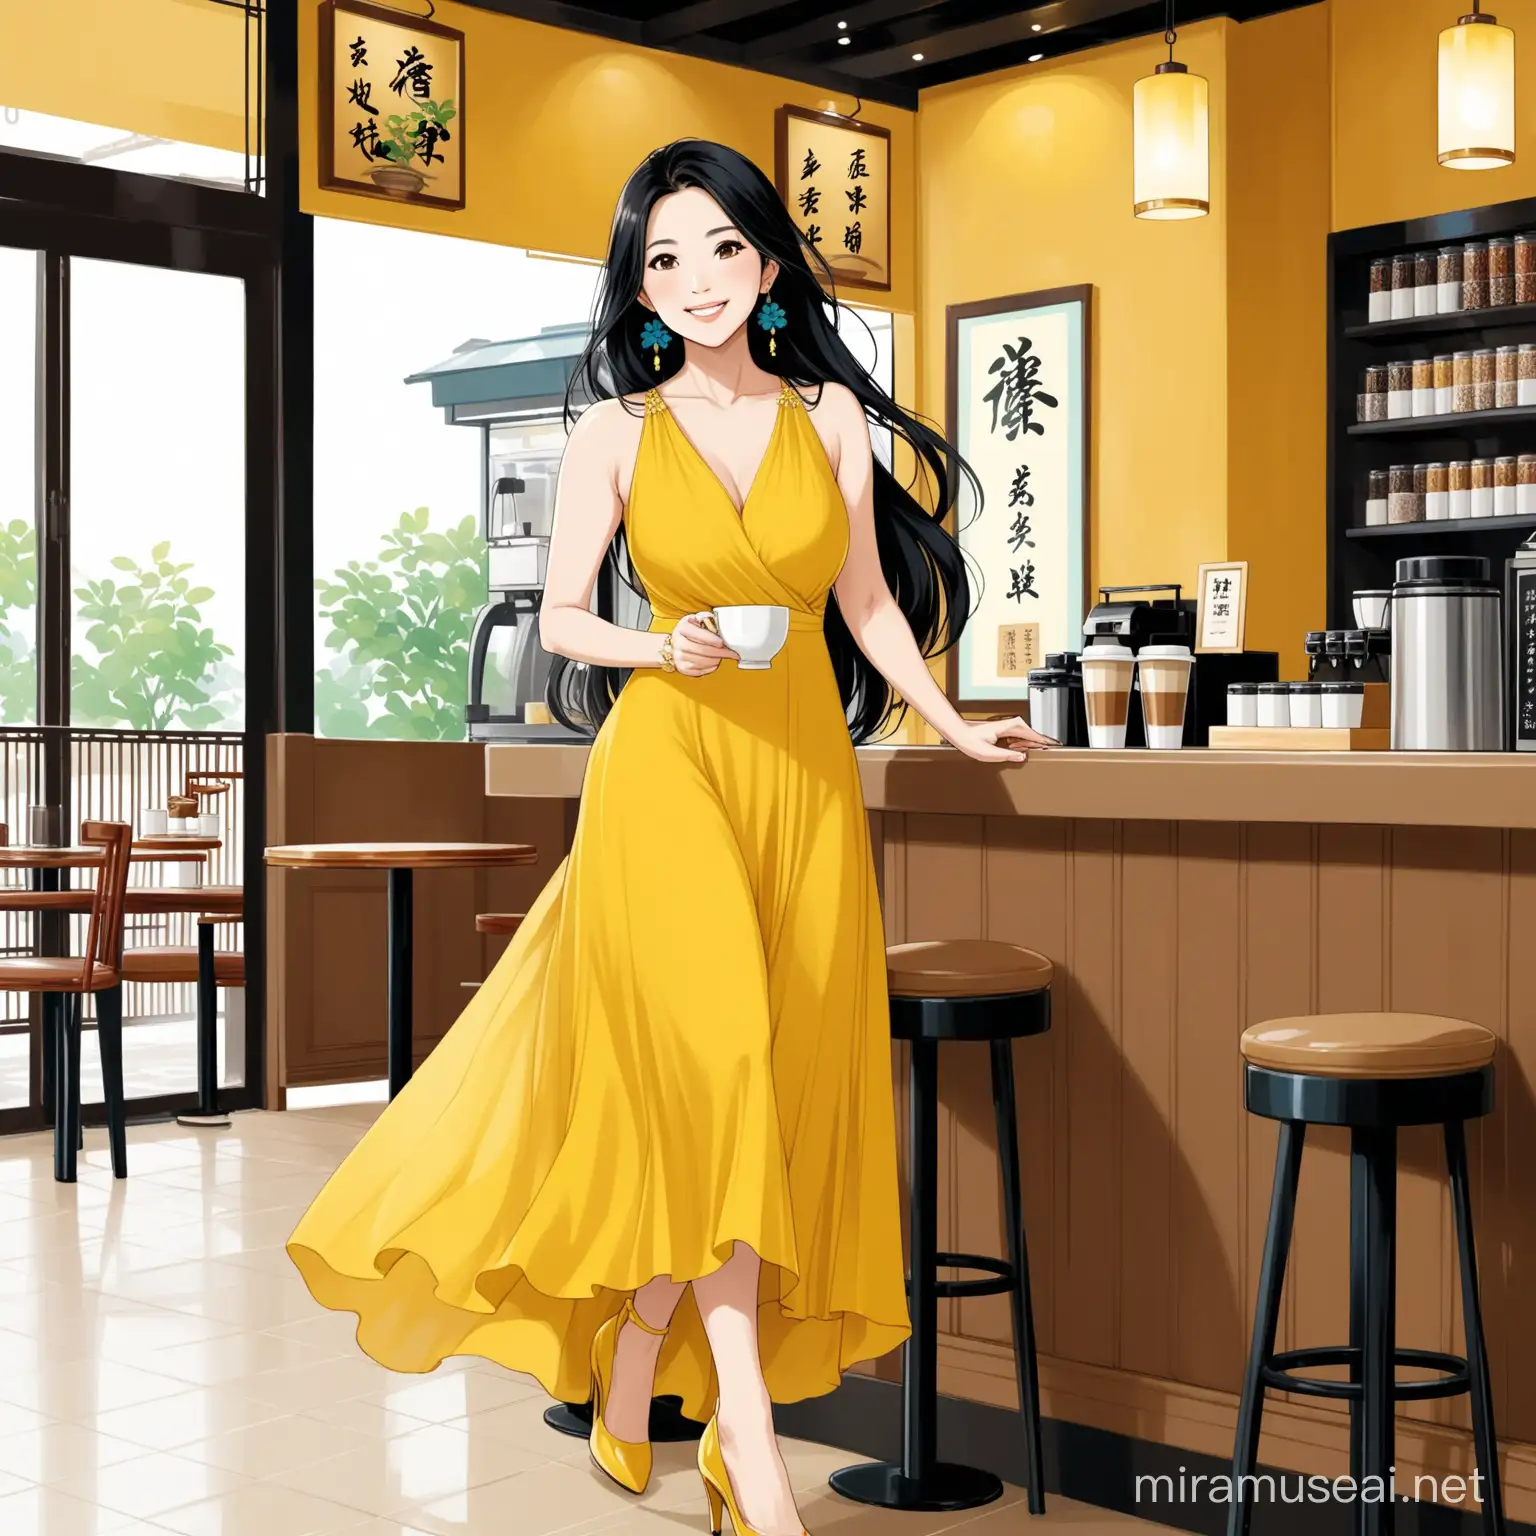 Smiling Asian Woman in Yellow Dress Enjoying Coffee at a Cozy Cafe